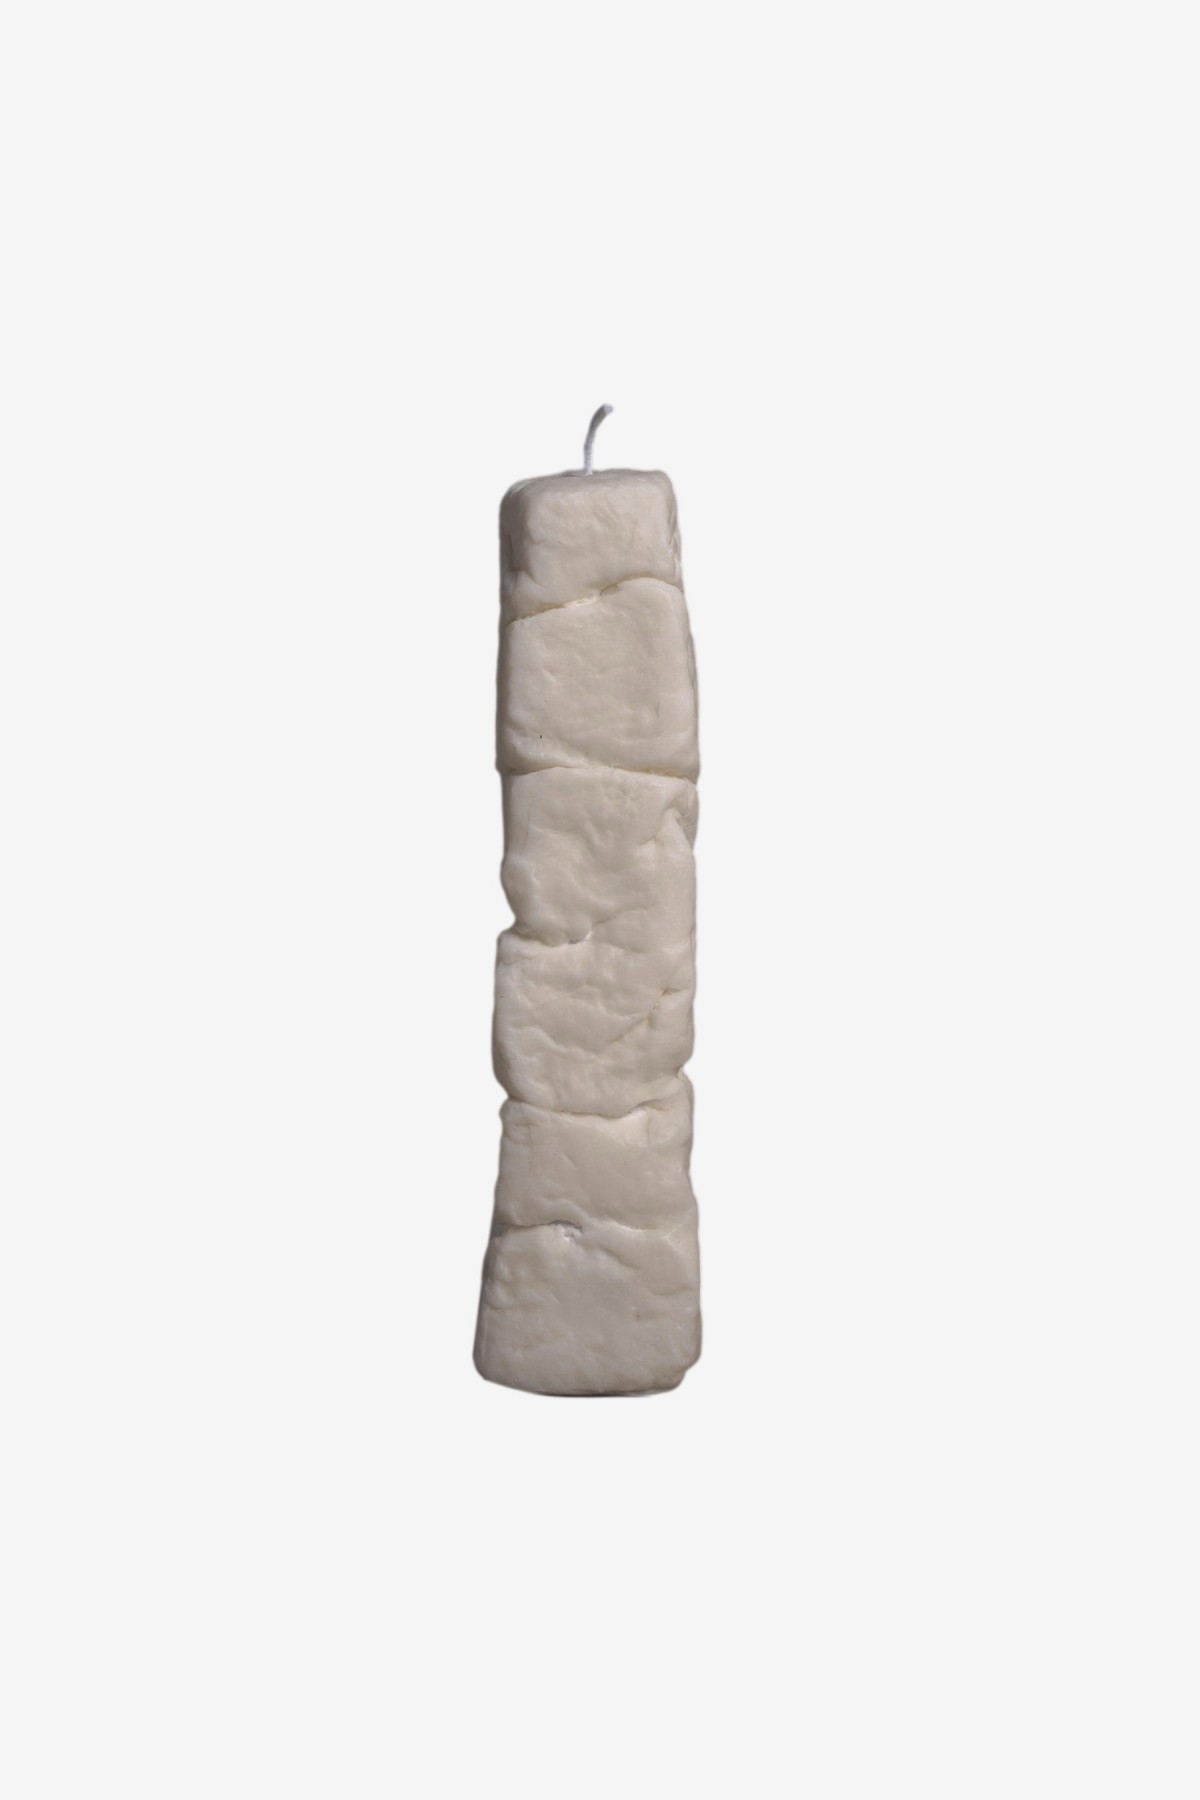 Satta Tall Rock Candle in Unscented Soy Wax